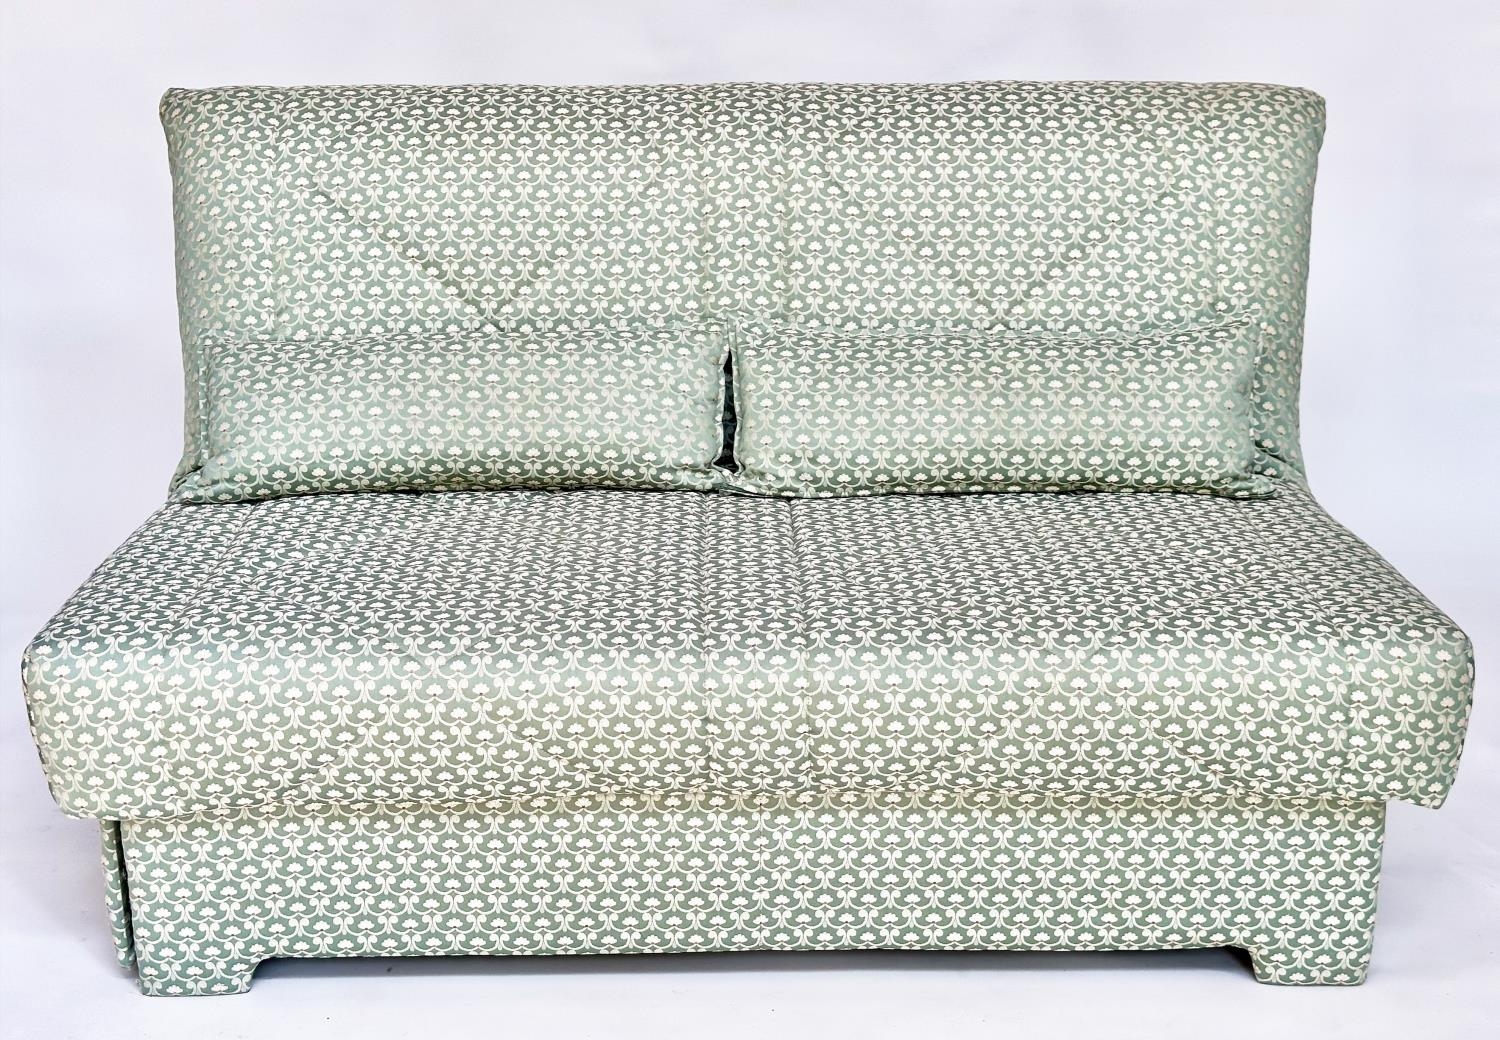 SOFA BED, geometric print upholstered with cushion, transferring to bed, 142cm W (180cm extended).